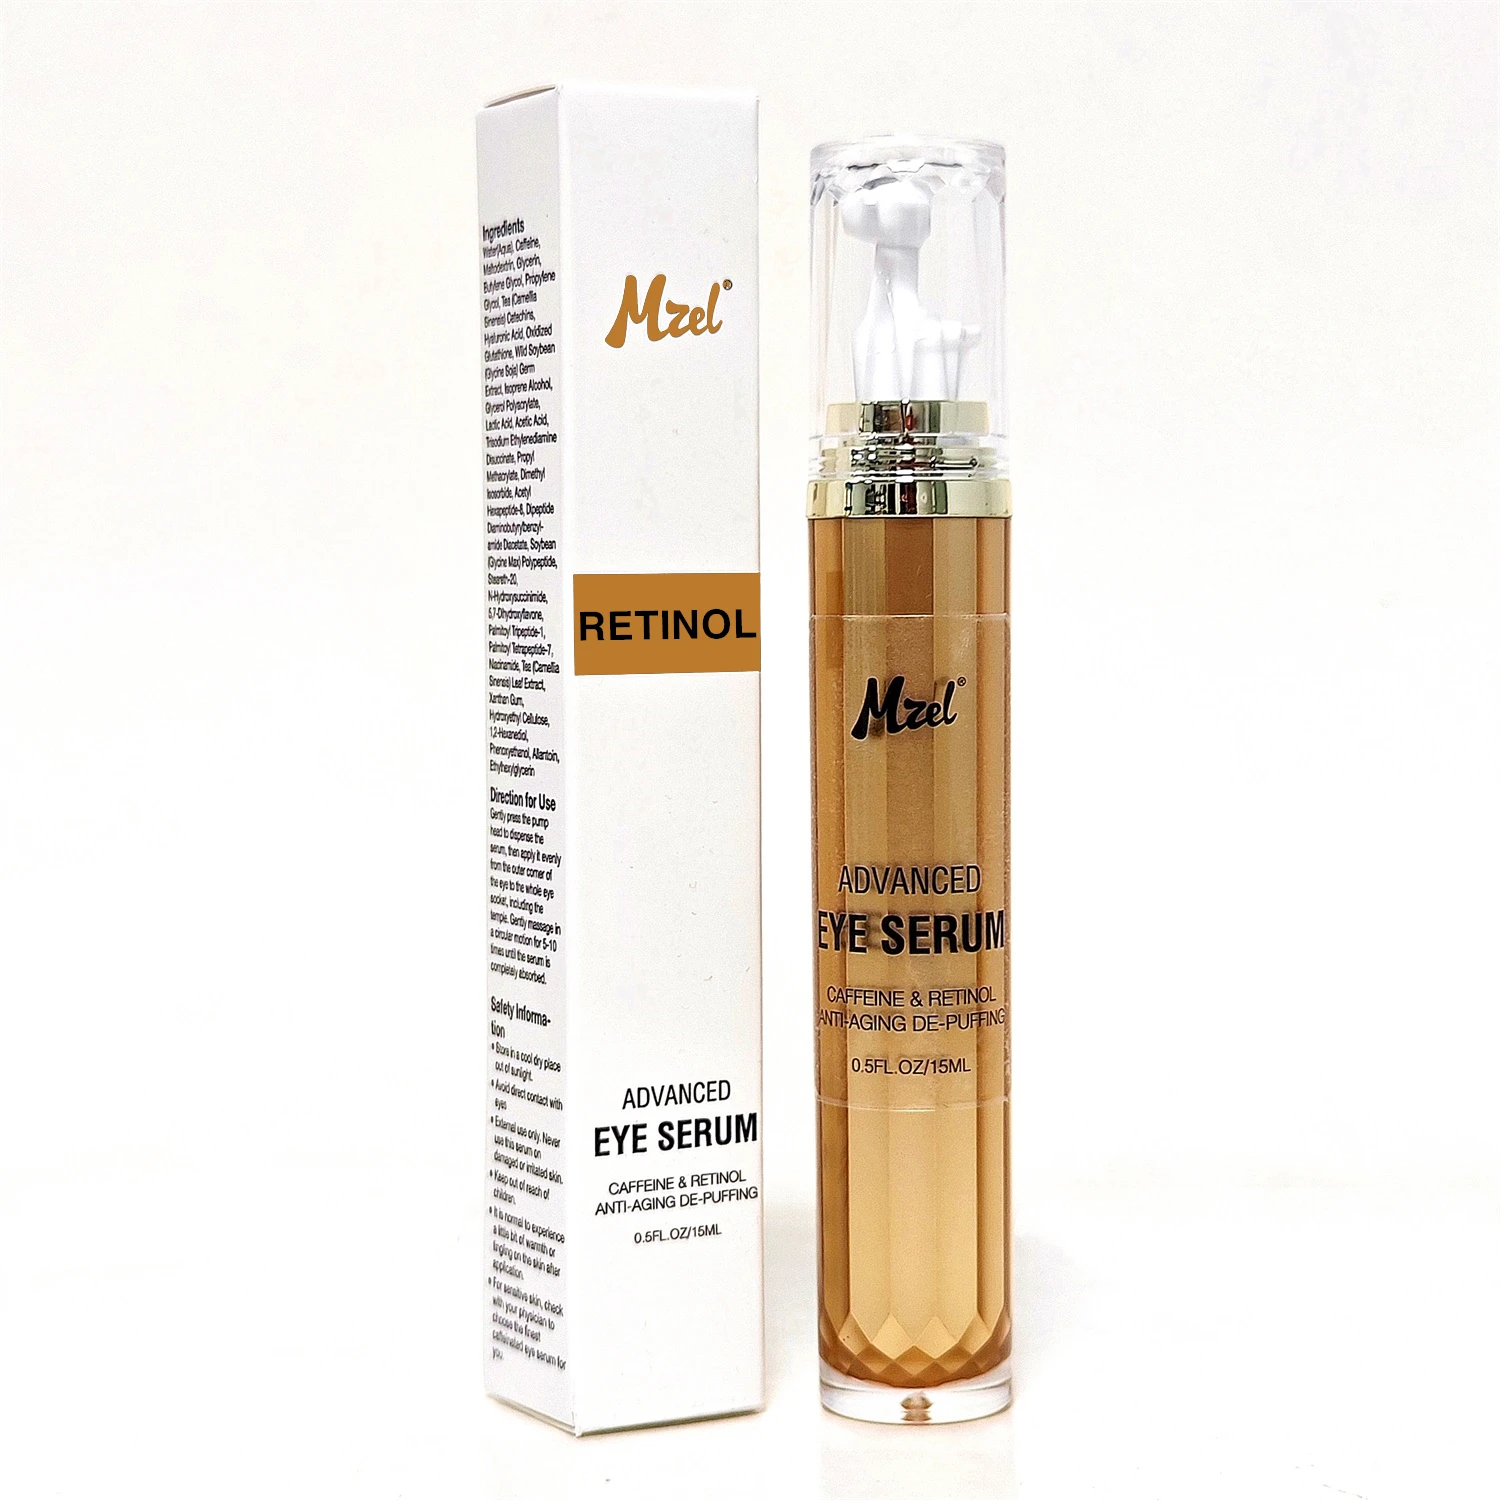 Advanced Eye Serum with Retinol and Rollerball Applicator for Reducing Fine Lines and Wrinkles